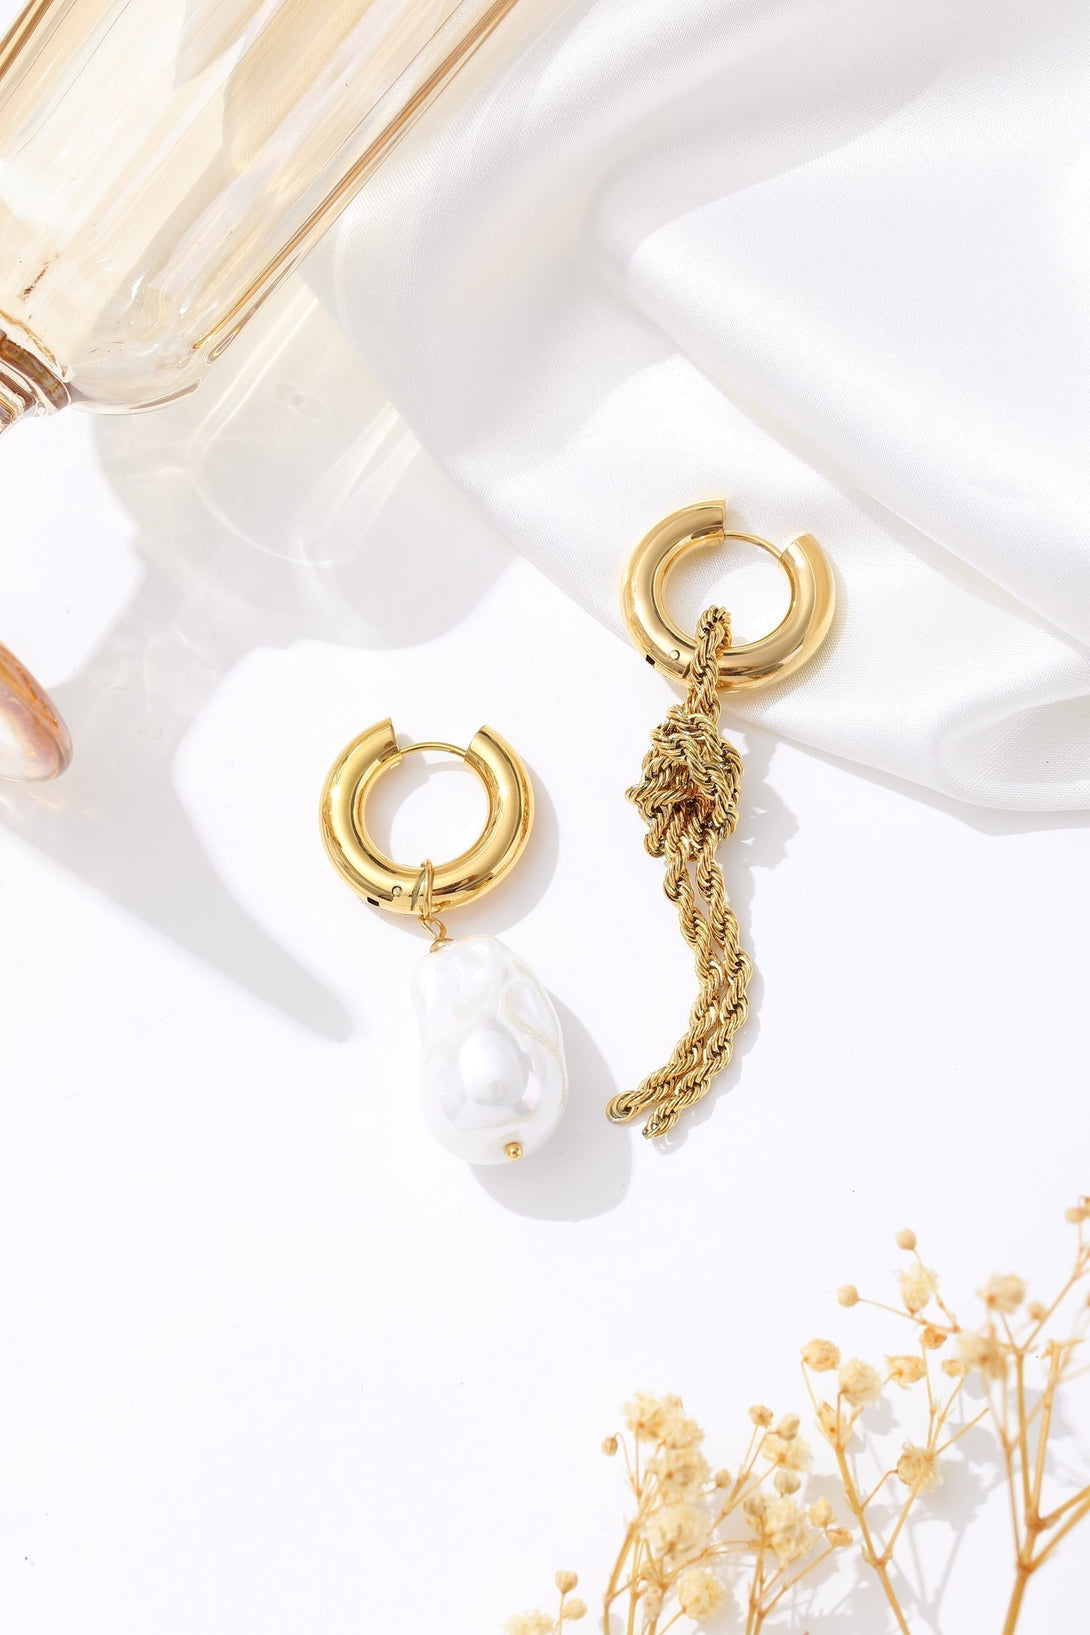 Unique Asymmetrical Gold Rope Chain Baroque Pearl Drop Earrings - Classicharms